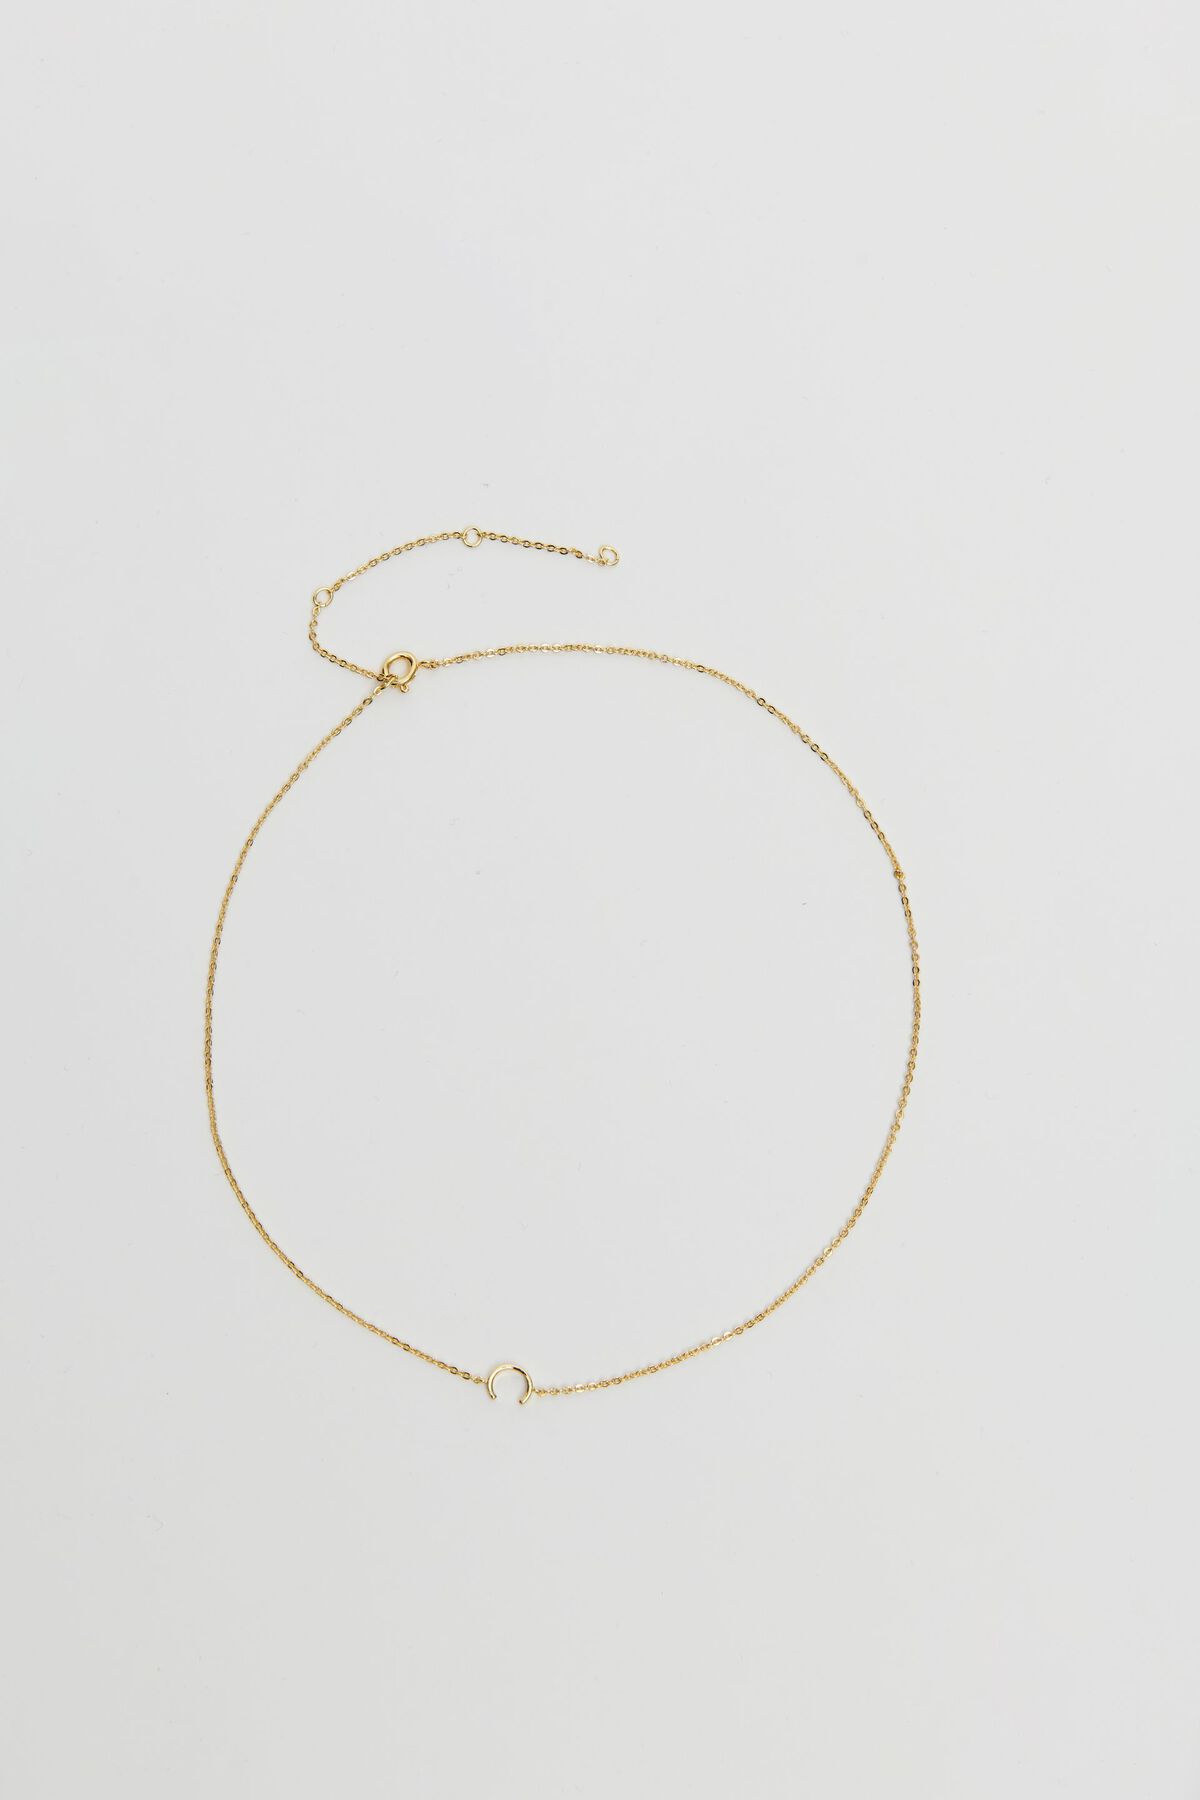 Garage 14K Gold Plated Initial Necklace. 4